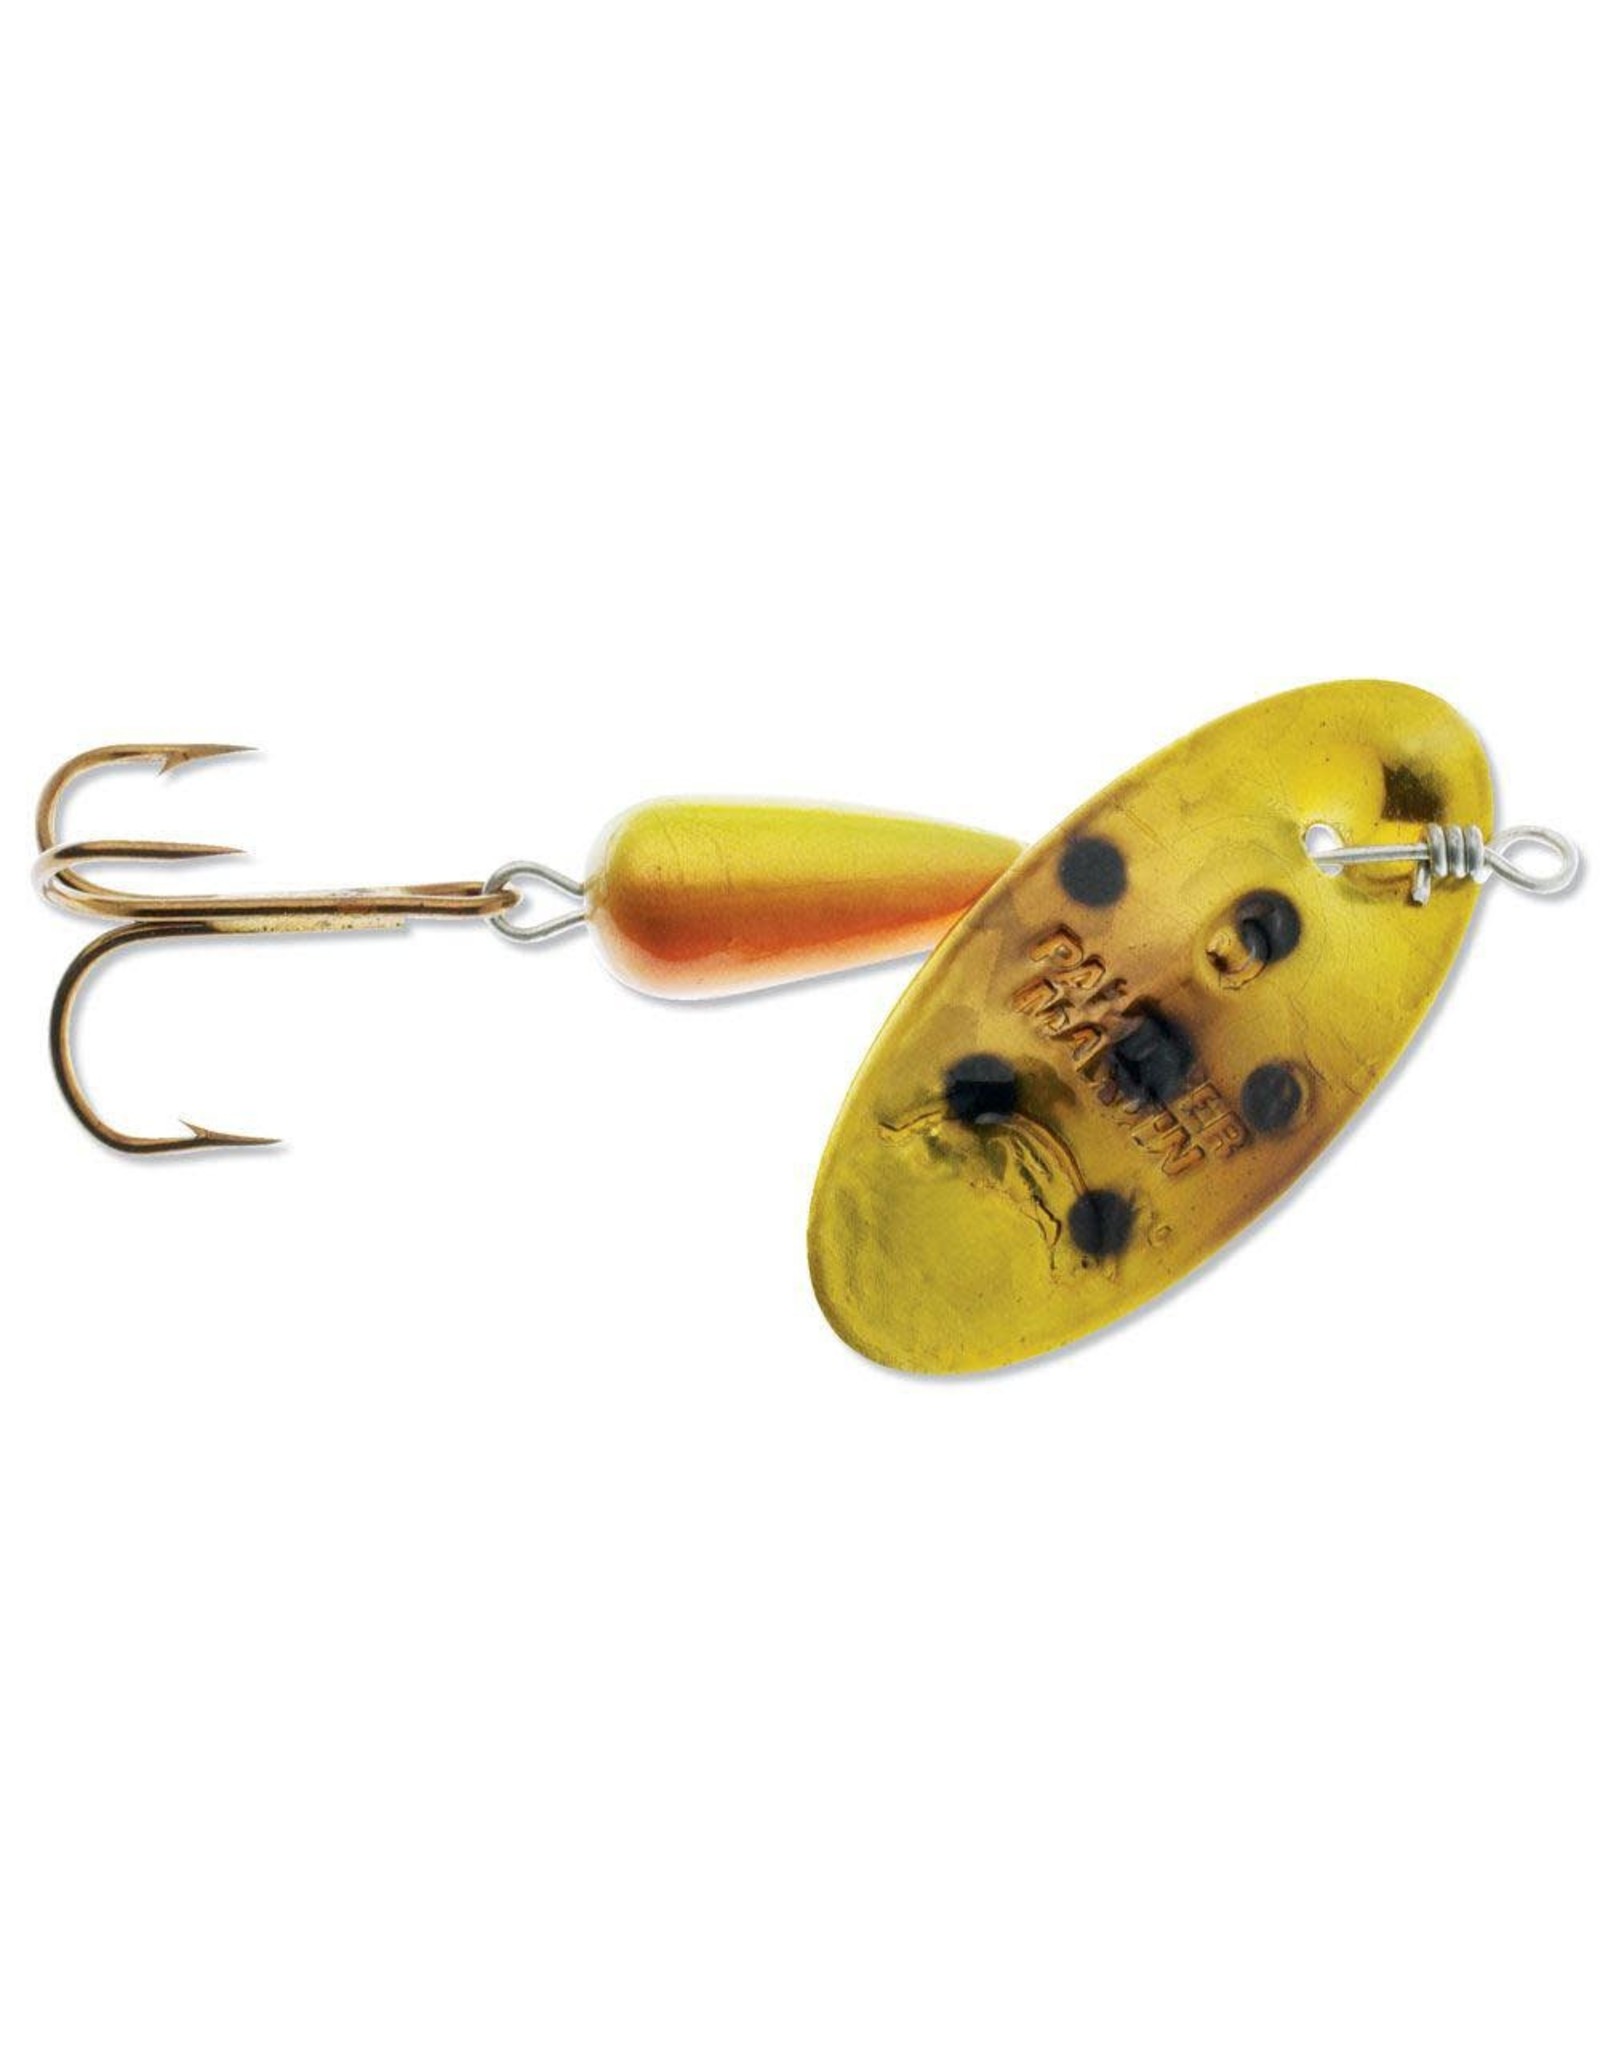 Panther Martin Panther Martin 1/4 Oz. - Holographic Brown Trout